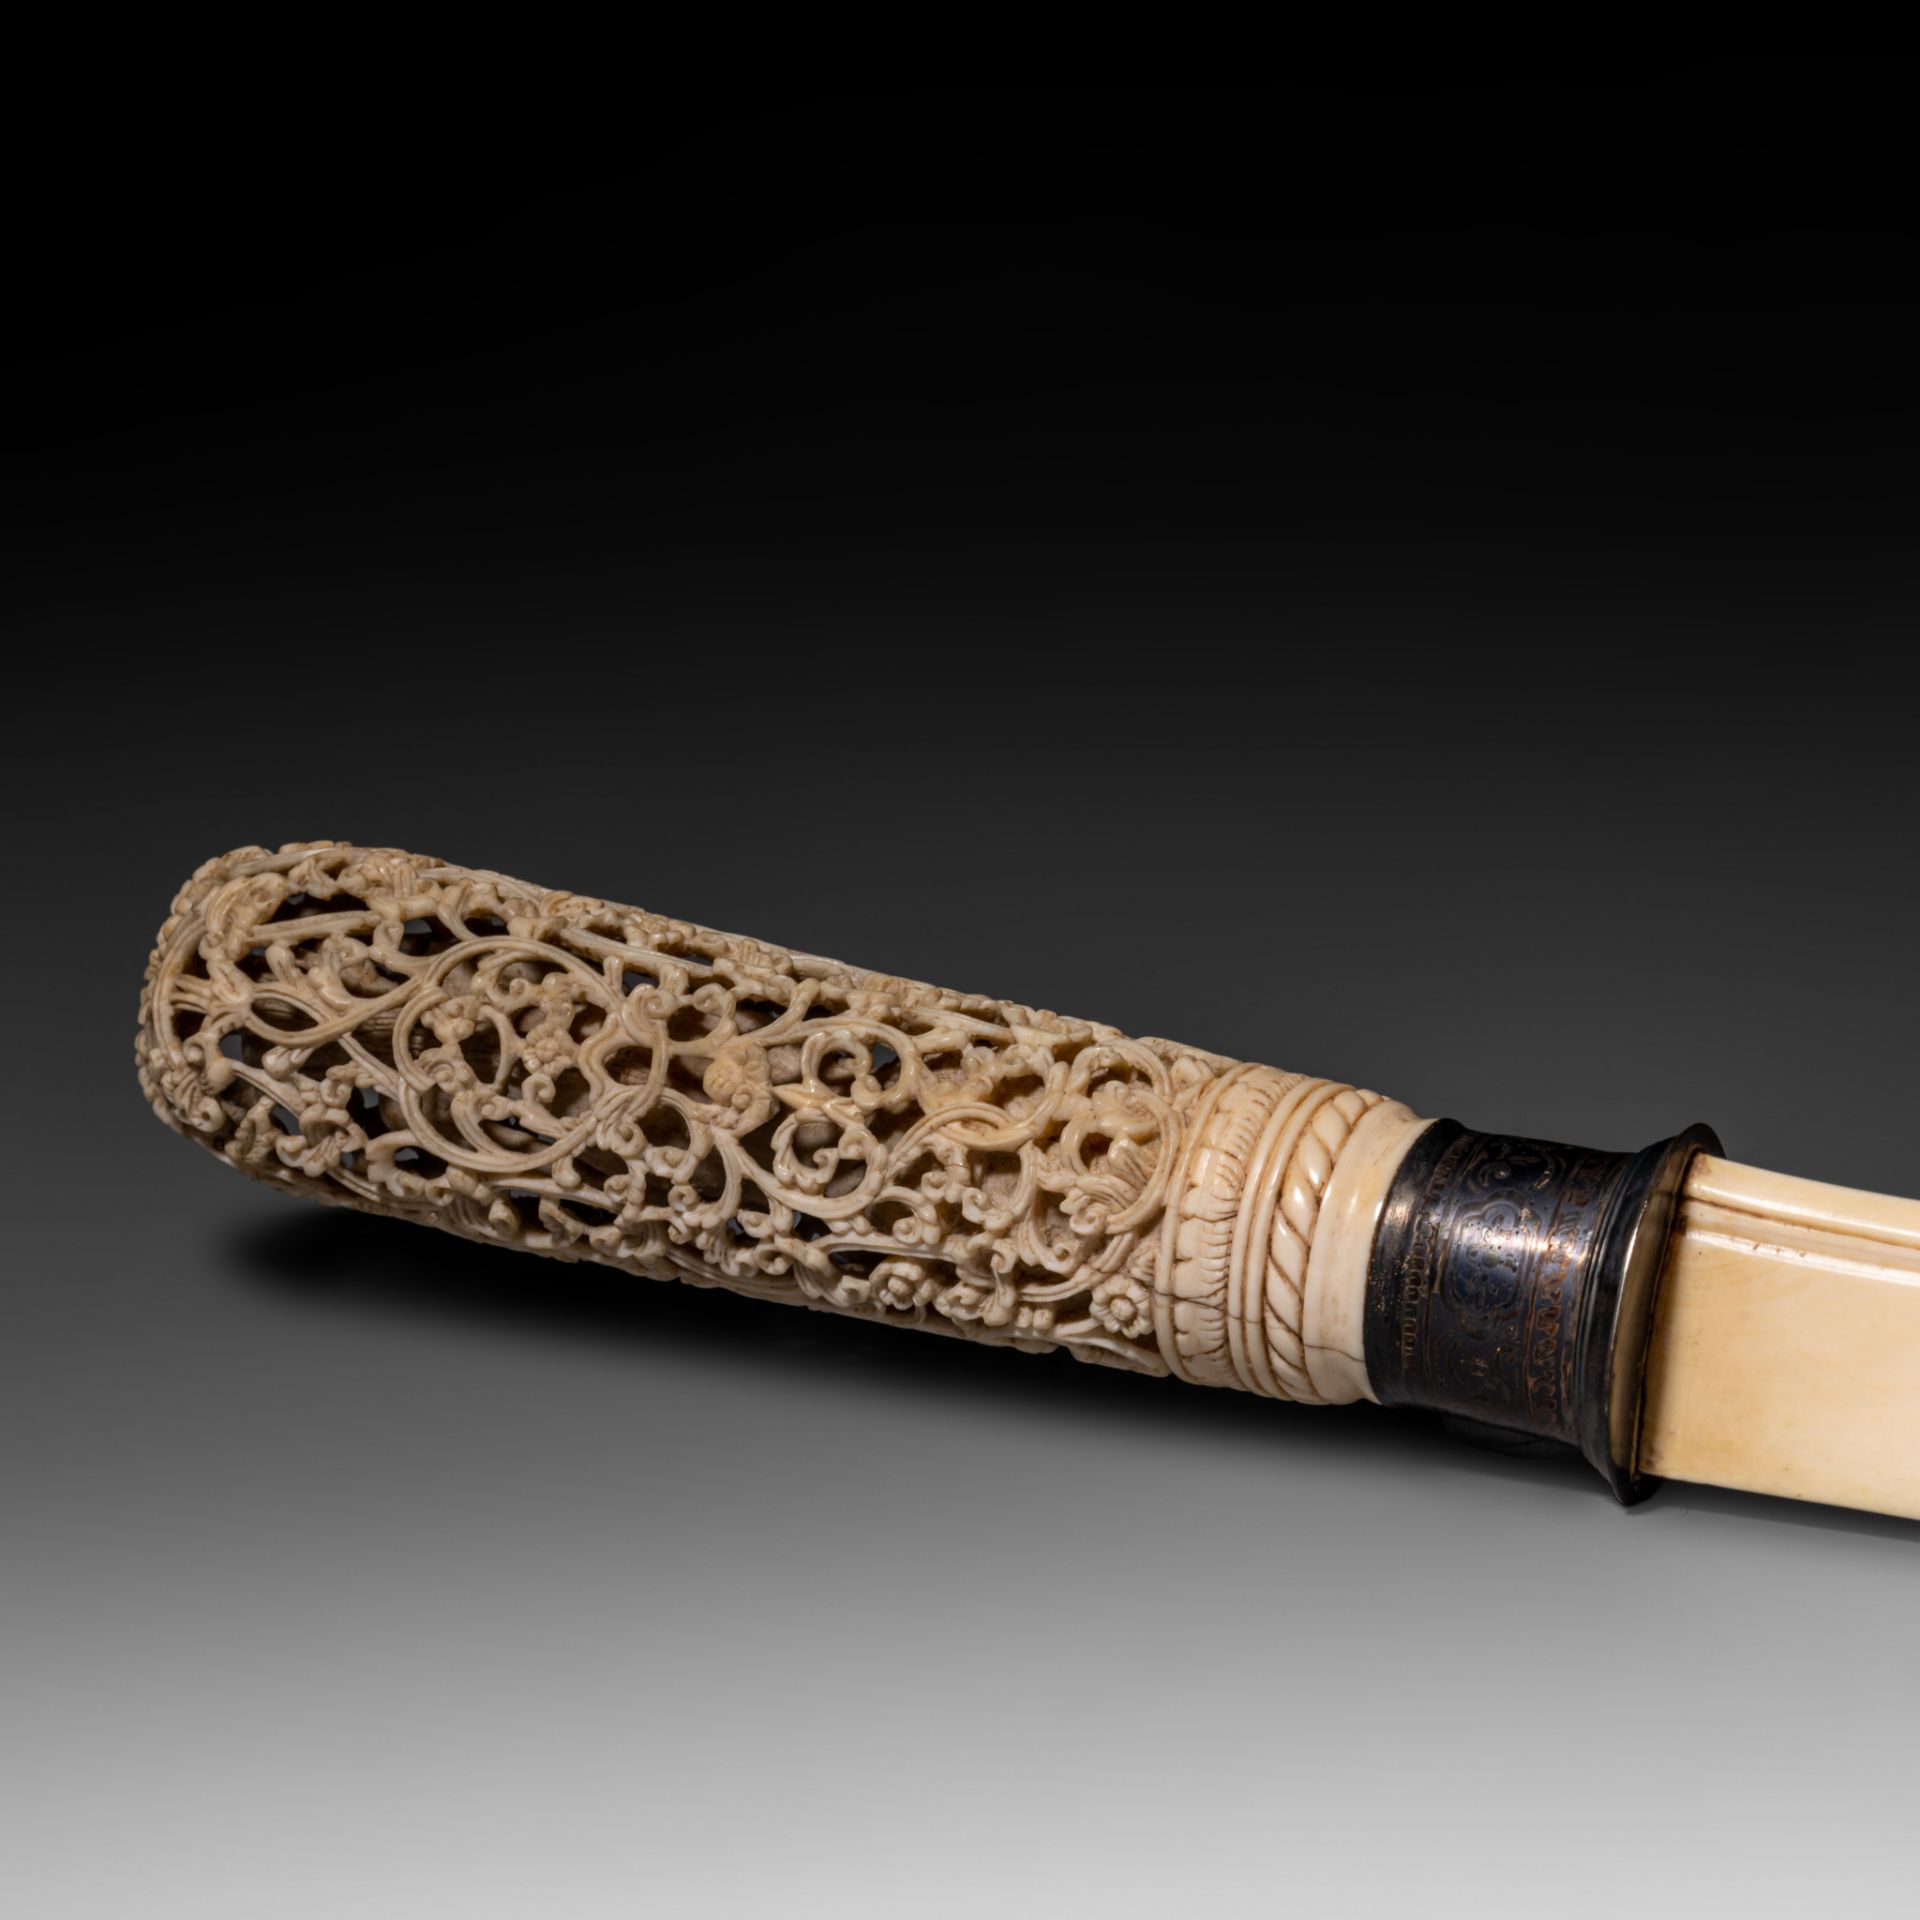 Two Burmese Colonial Ivory paperknives, L 51 cm - 200 g / L 35,8 cm - 80 g, both items are 19th or e - Bild 9 aus 18